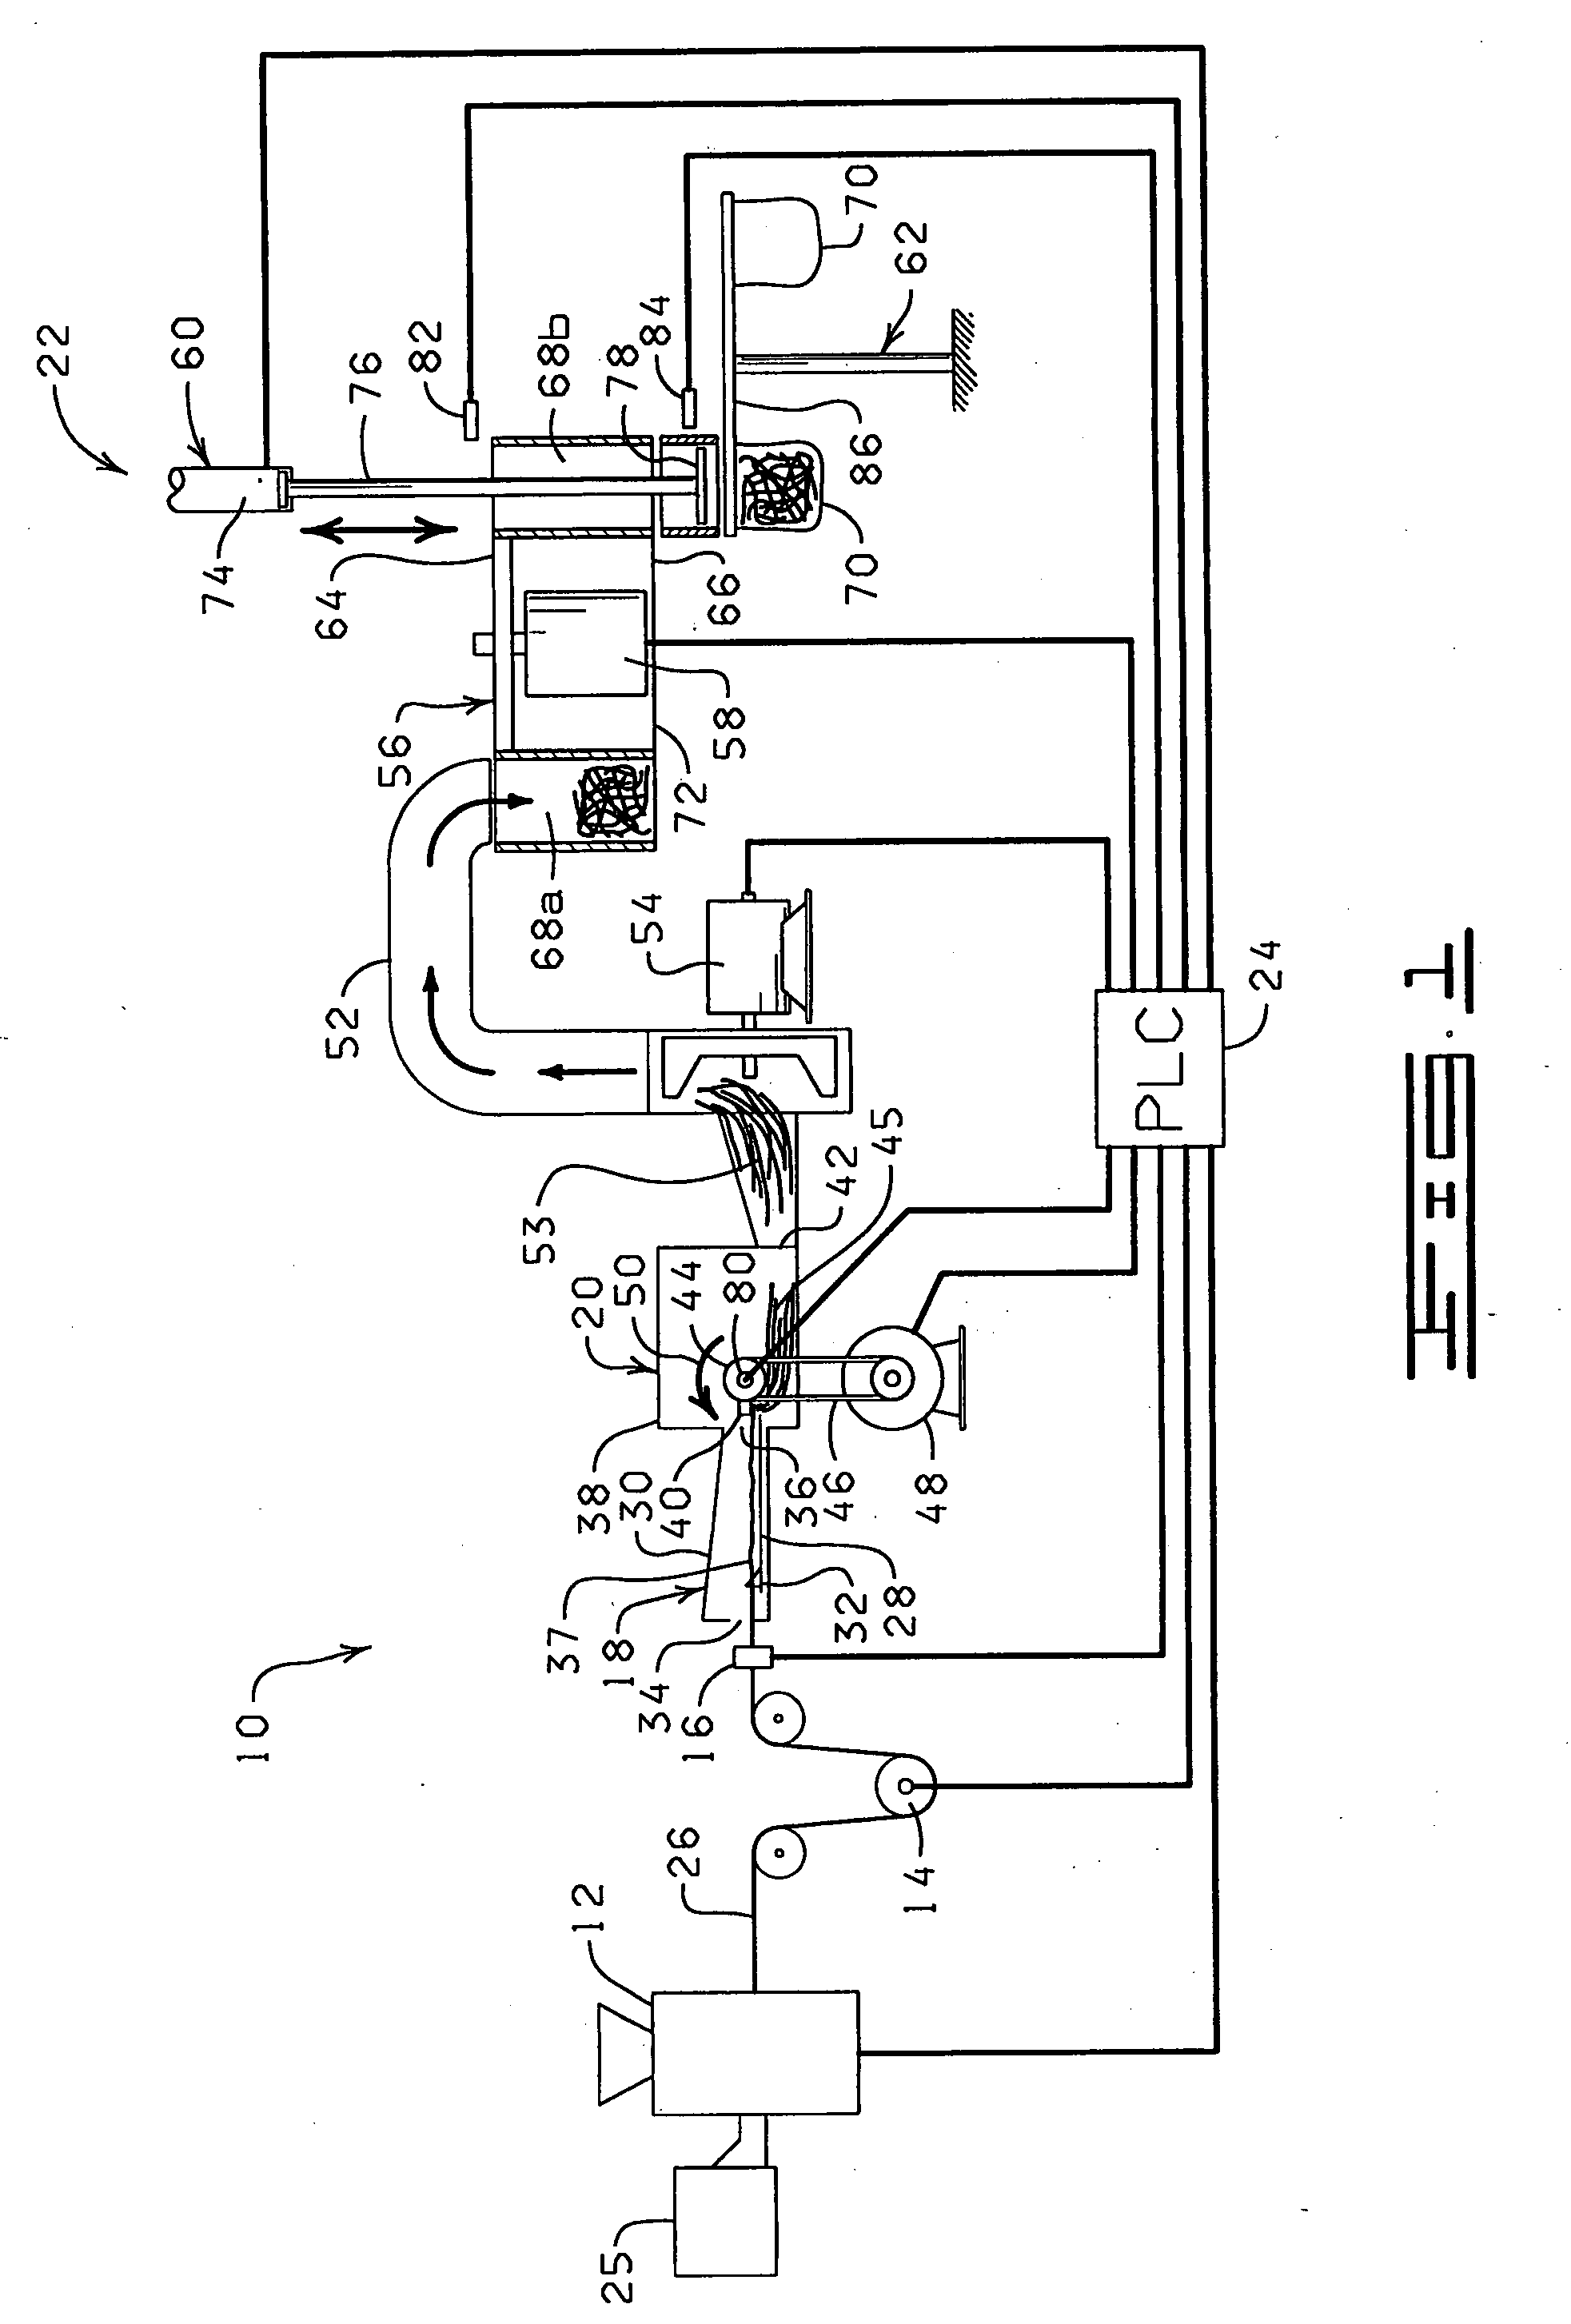 Apparatus and method for making and bagging decorative grass